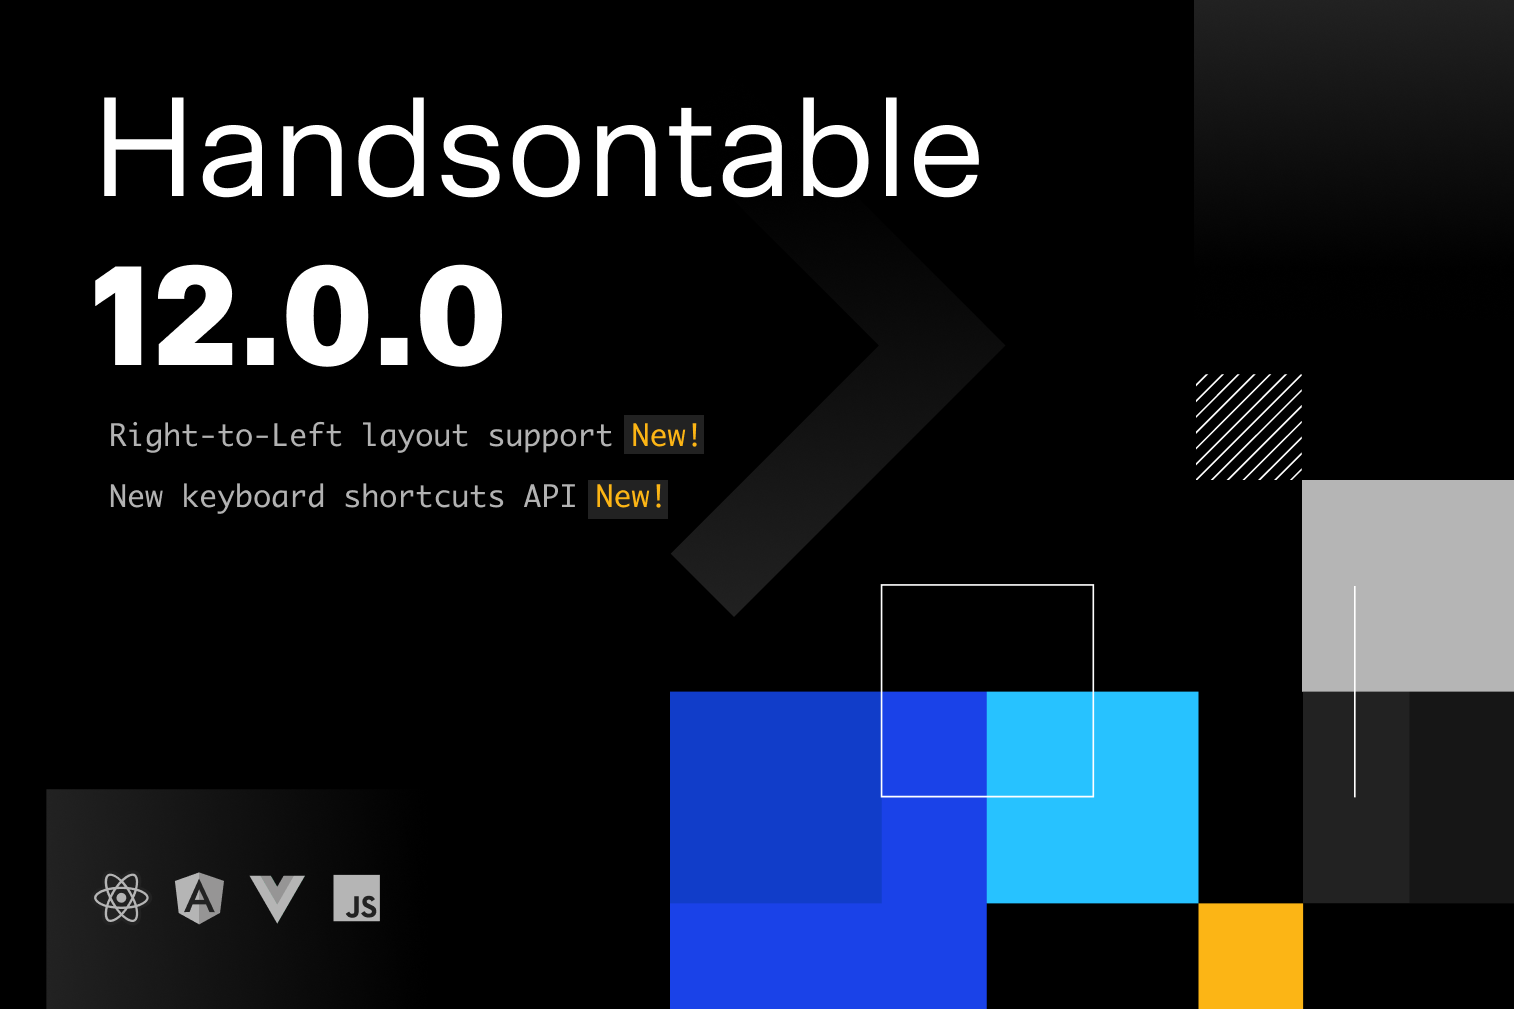 Handsontable 12.0.0: RTL support, and a new keyboard shortcuts API